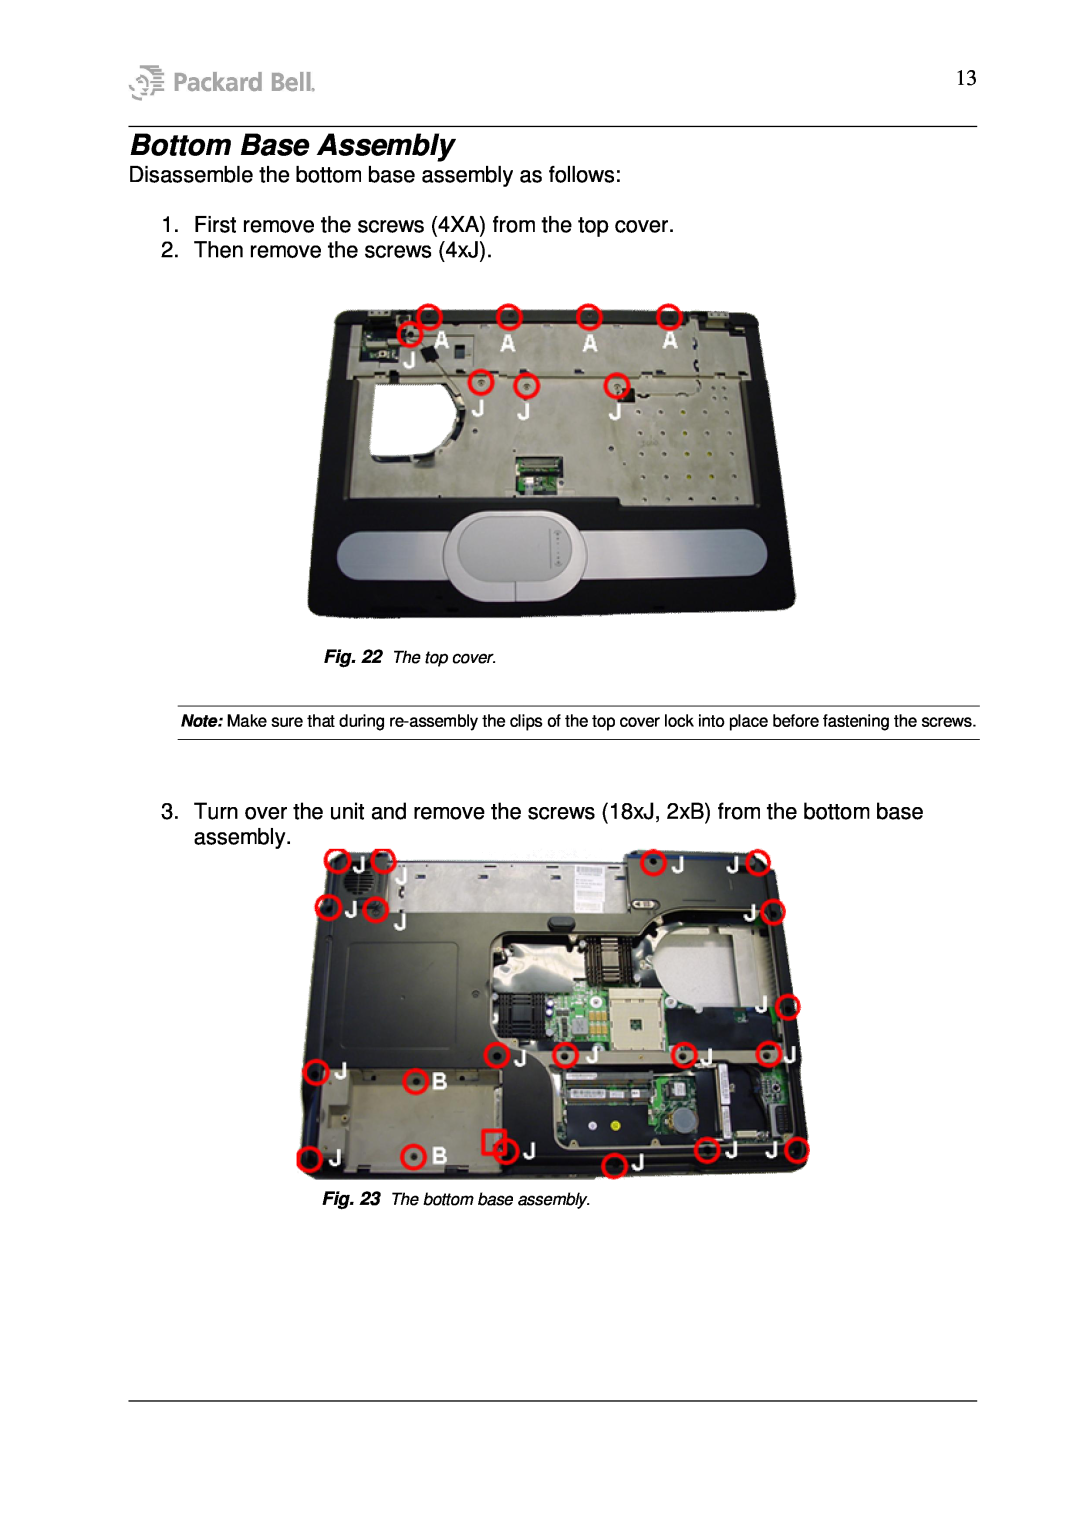 Packard Bell W7 manual Bottom Base Assembly, Disassemble the bottom base assembly as follows, Then remove the screws 4xJ 